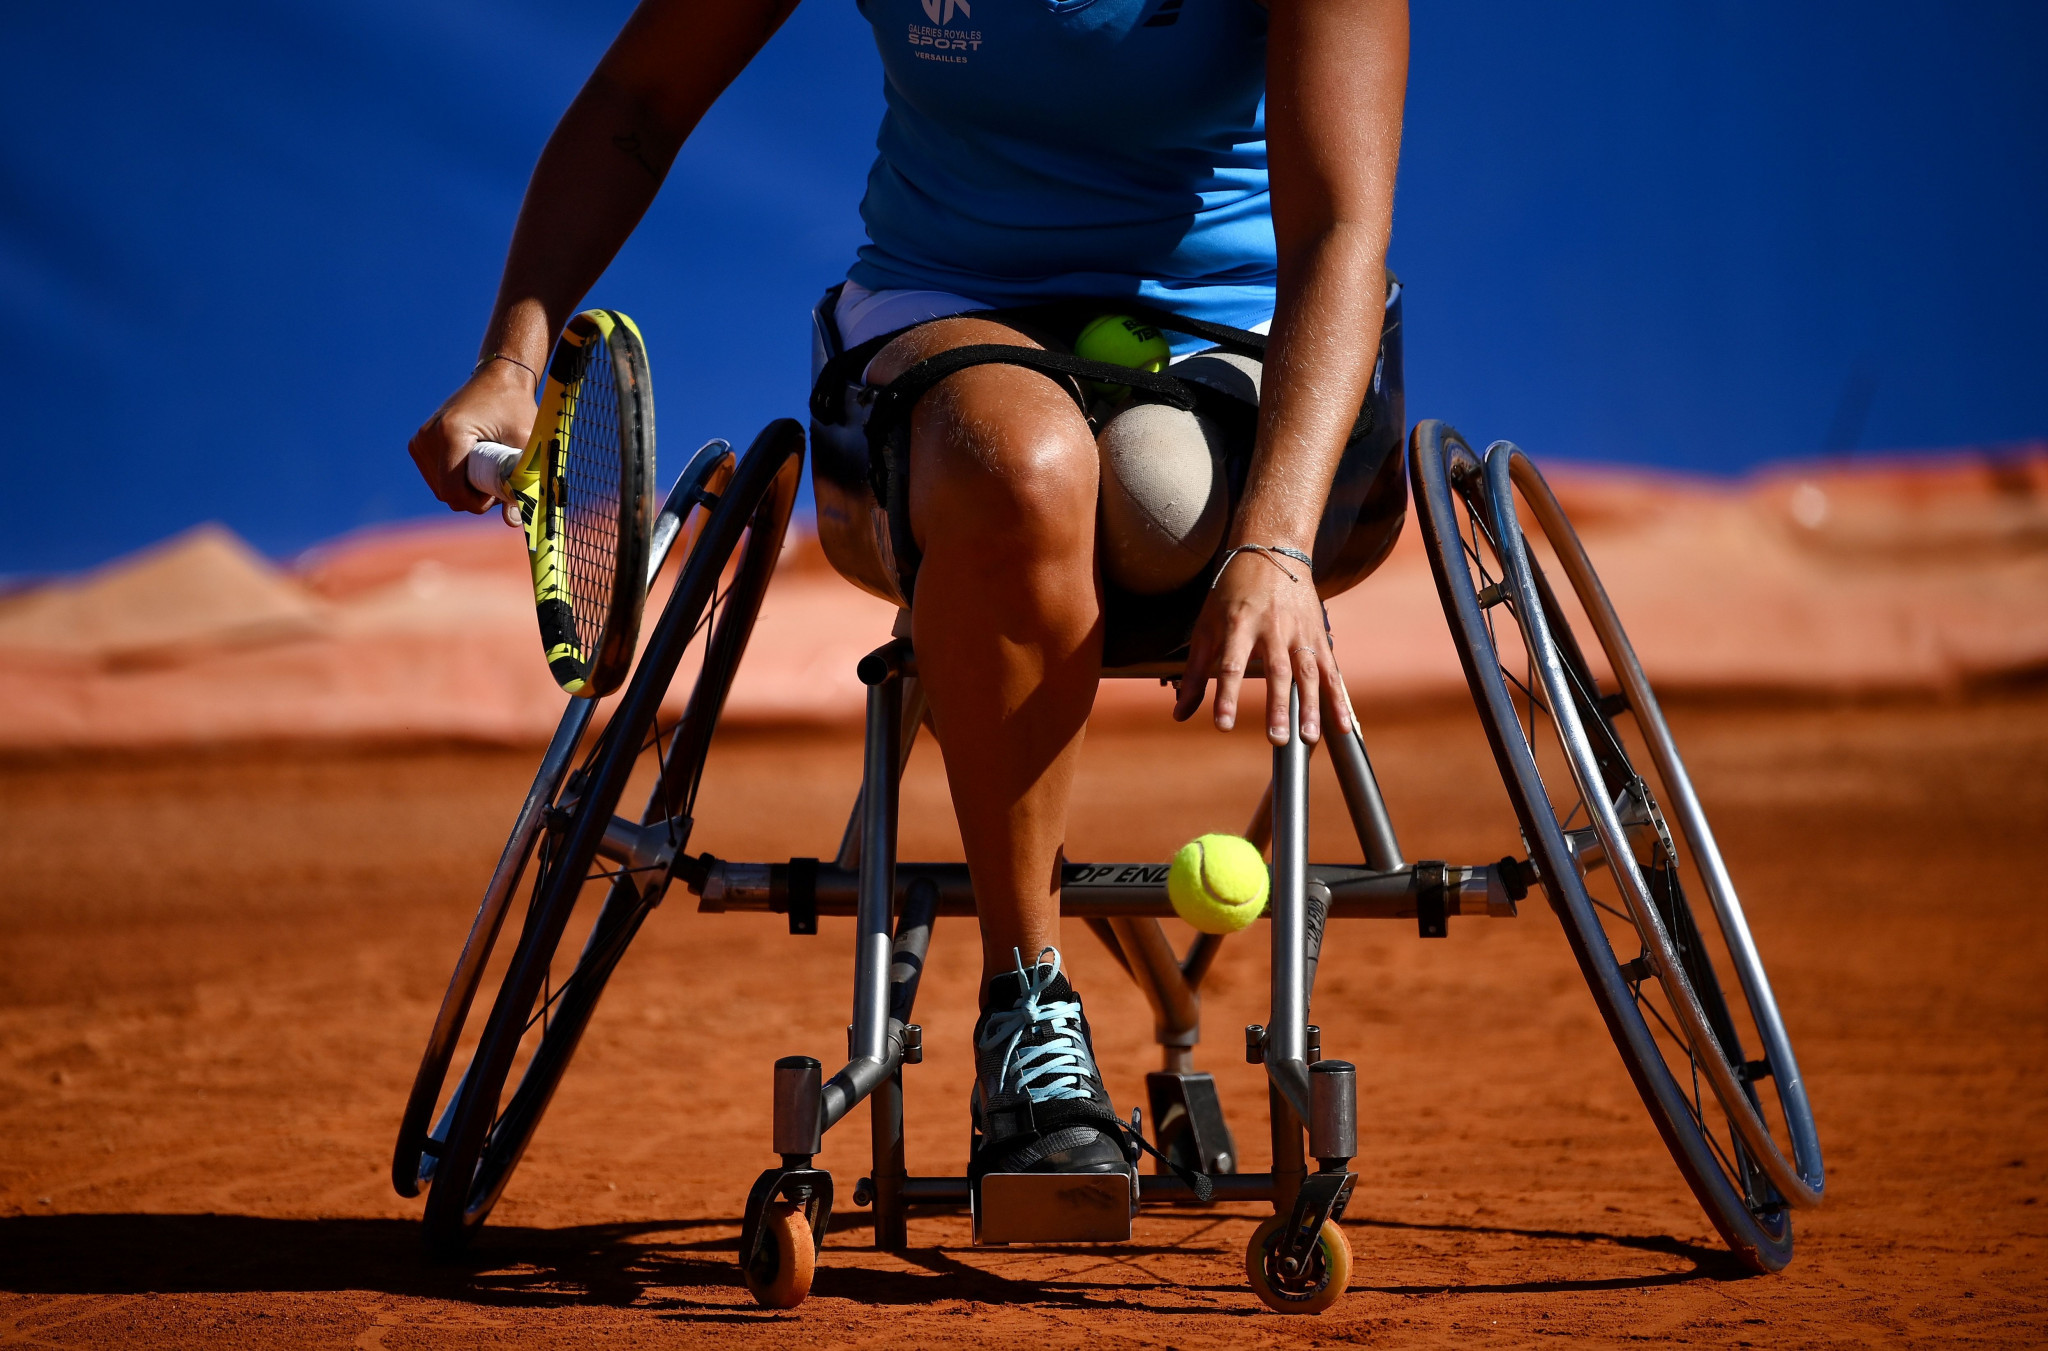 Inter-American Development Bank partner with IPC to develop Para sport in Americas